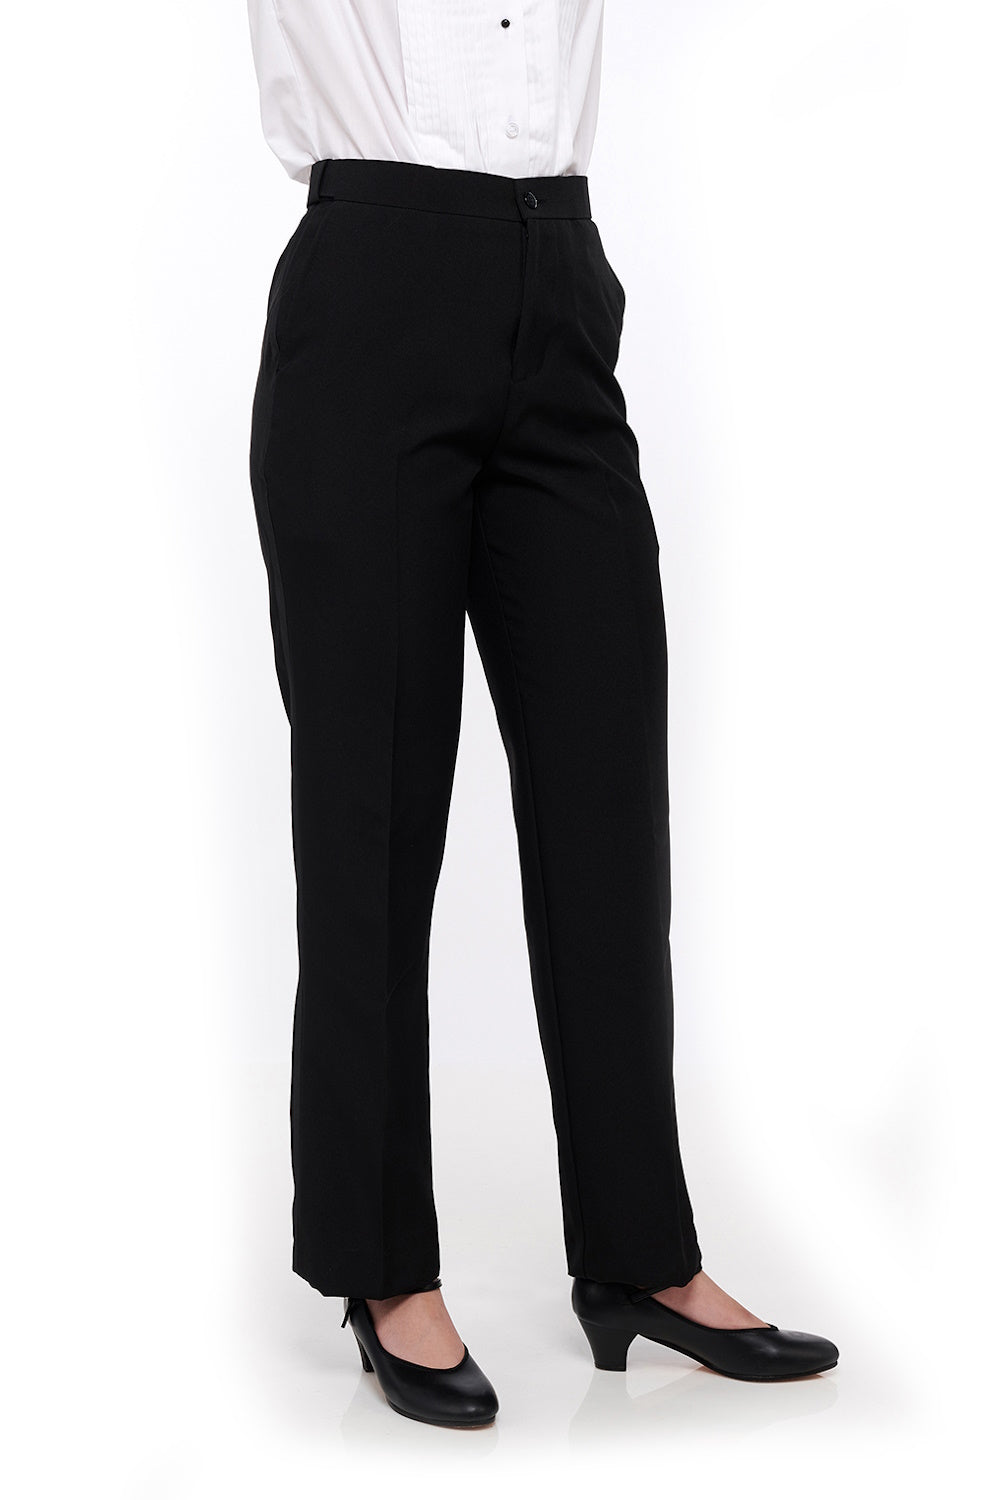 Trousers With Matching Belt Casual Formal Office Pants For Ladies - White -  Wholesale Womens Clothing Vendors For Boutiques